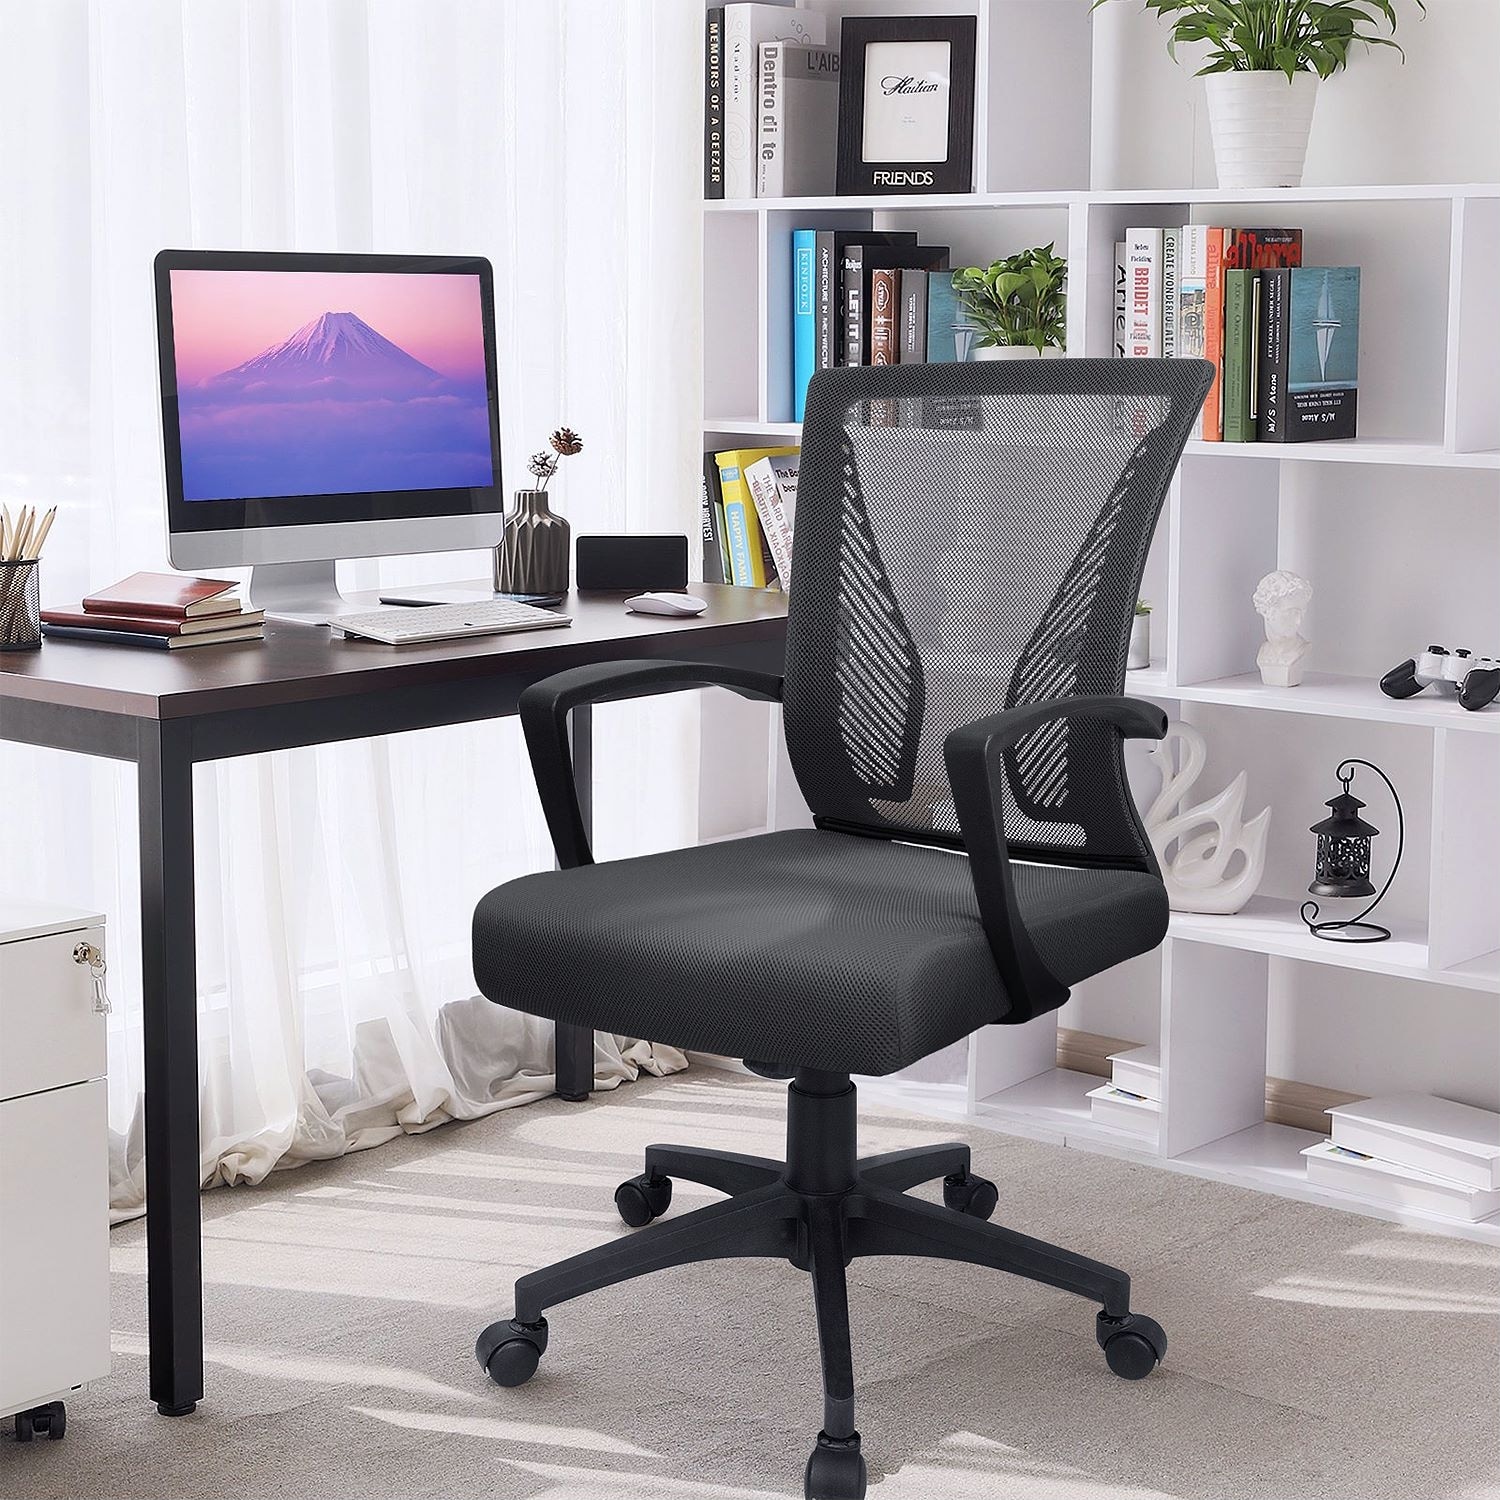 https://ak1.ostkcdn.com/images/products/is/images/direct/dcd096a72256052e7324fb108b4118e6b895bf2a/Office-Chair-Mid-Back-Swivel-Lumbar-Support-Desk-Chair%2C-Computer-Ergonomic-Mesh-Chair-with-Armrest.jpg